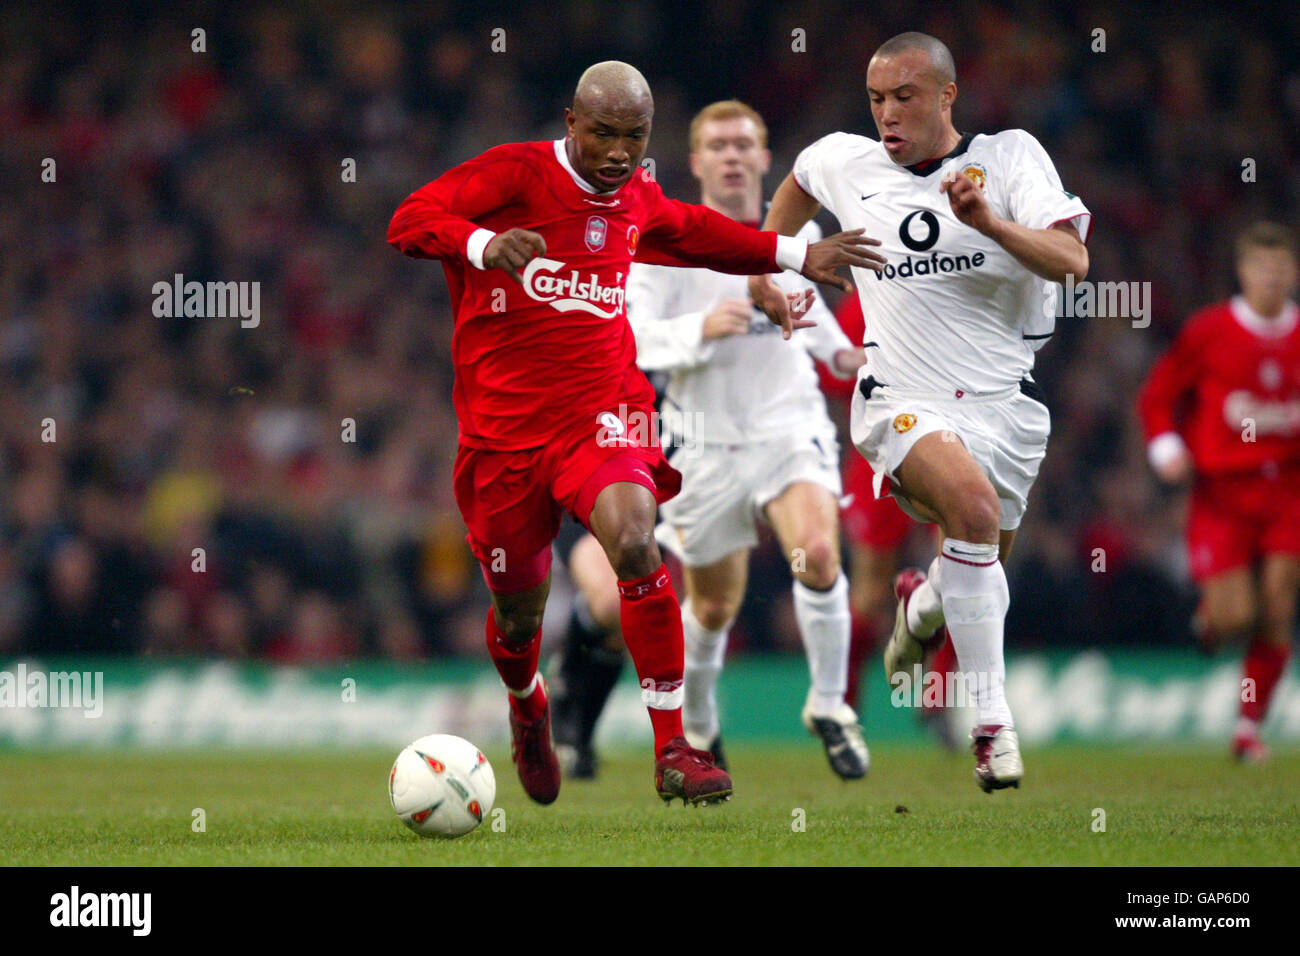 Soccer - Worthington Cup Final - Liverpool v Manchester United. Liverpool's El Hadji Diouf fends off the attentions of Mikael Silvestre, Manchester United Stock Photo